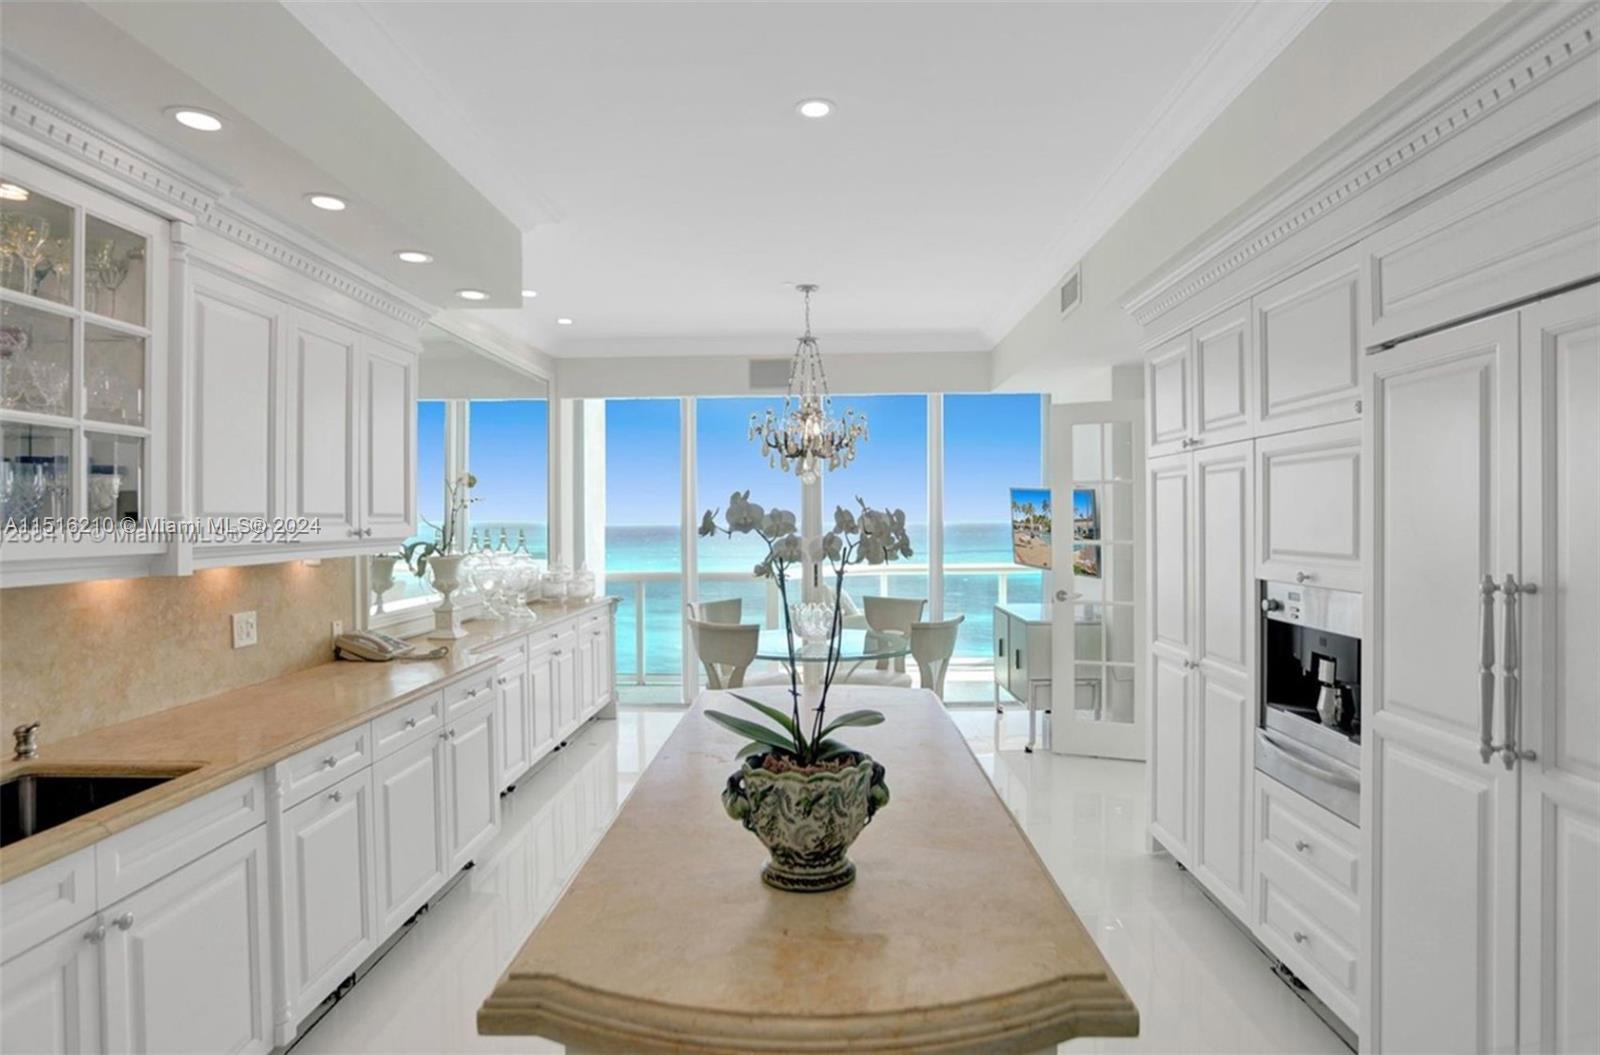 Exclusive SE Penthouse in the Prestigious Palace at Bal Harbour with magnificent views of direct oce